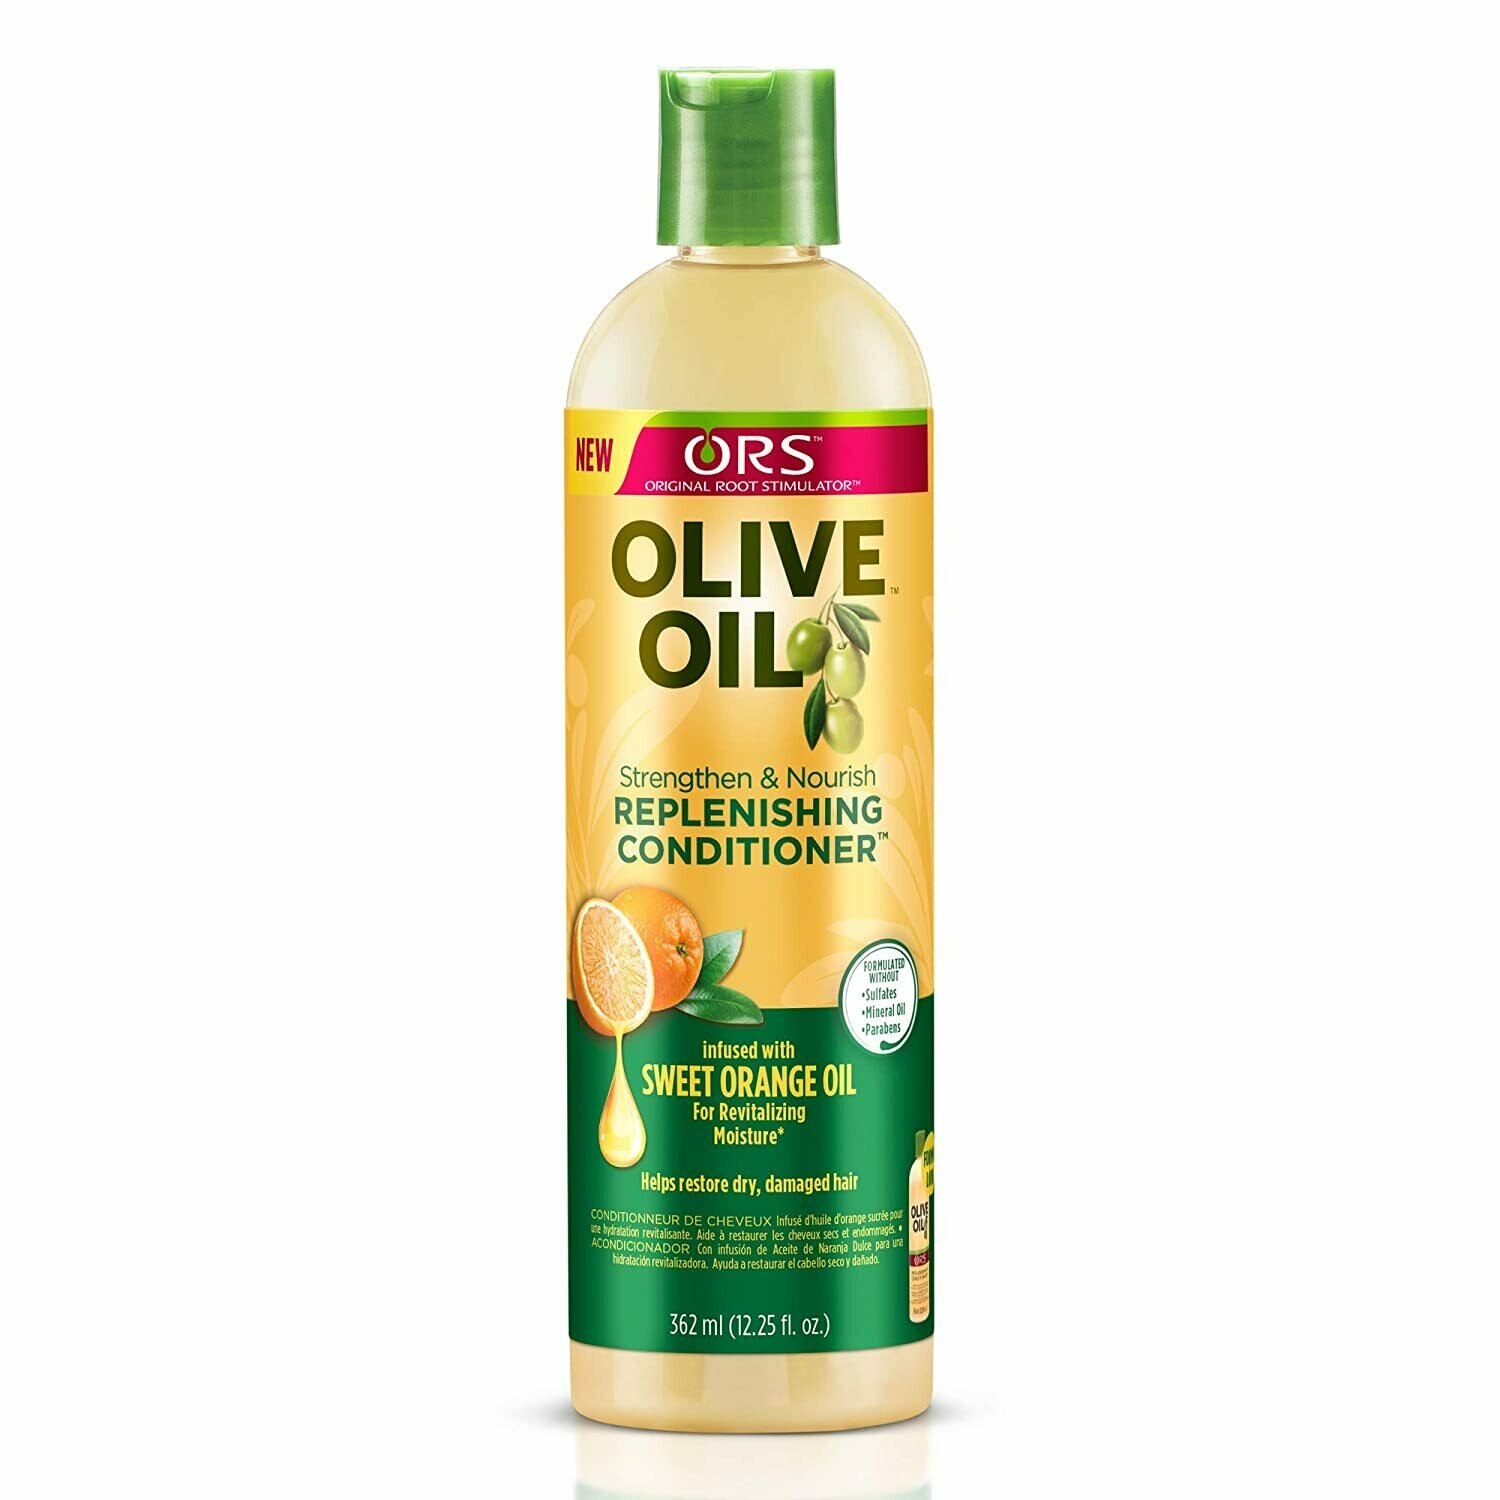 ORS Olive Oil Replenishing Conditioner 12oZ ( 362ml )